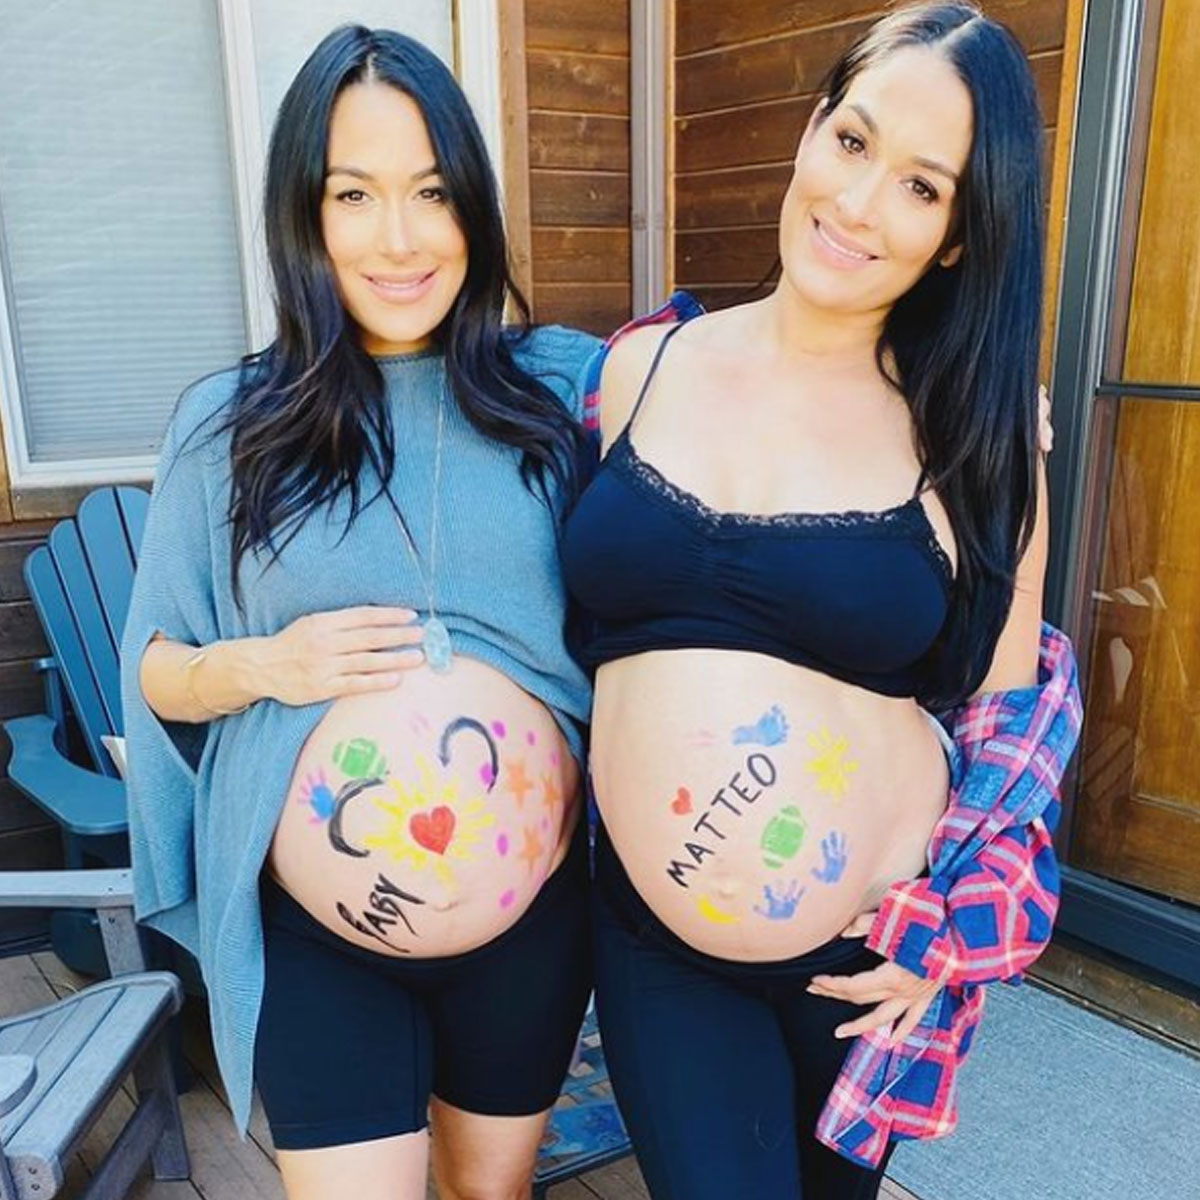 The Bella Twins announce they're both pregnant in People Magazine